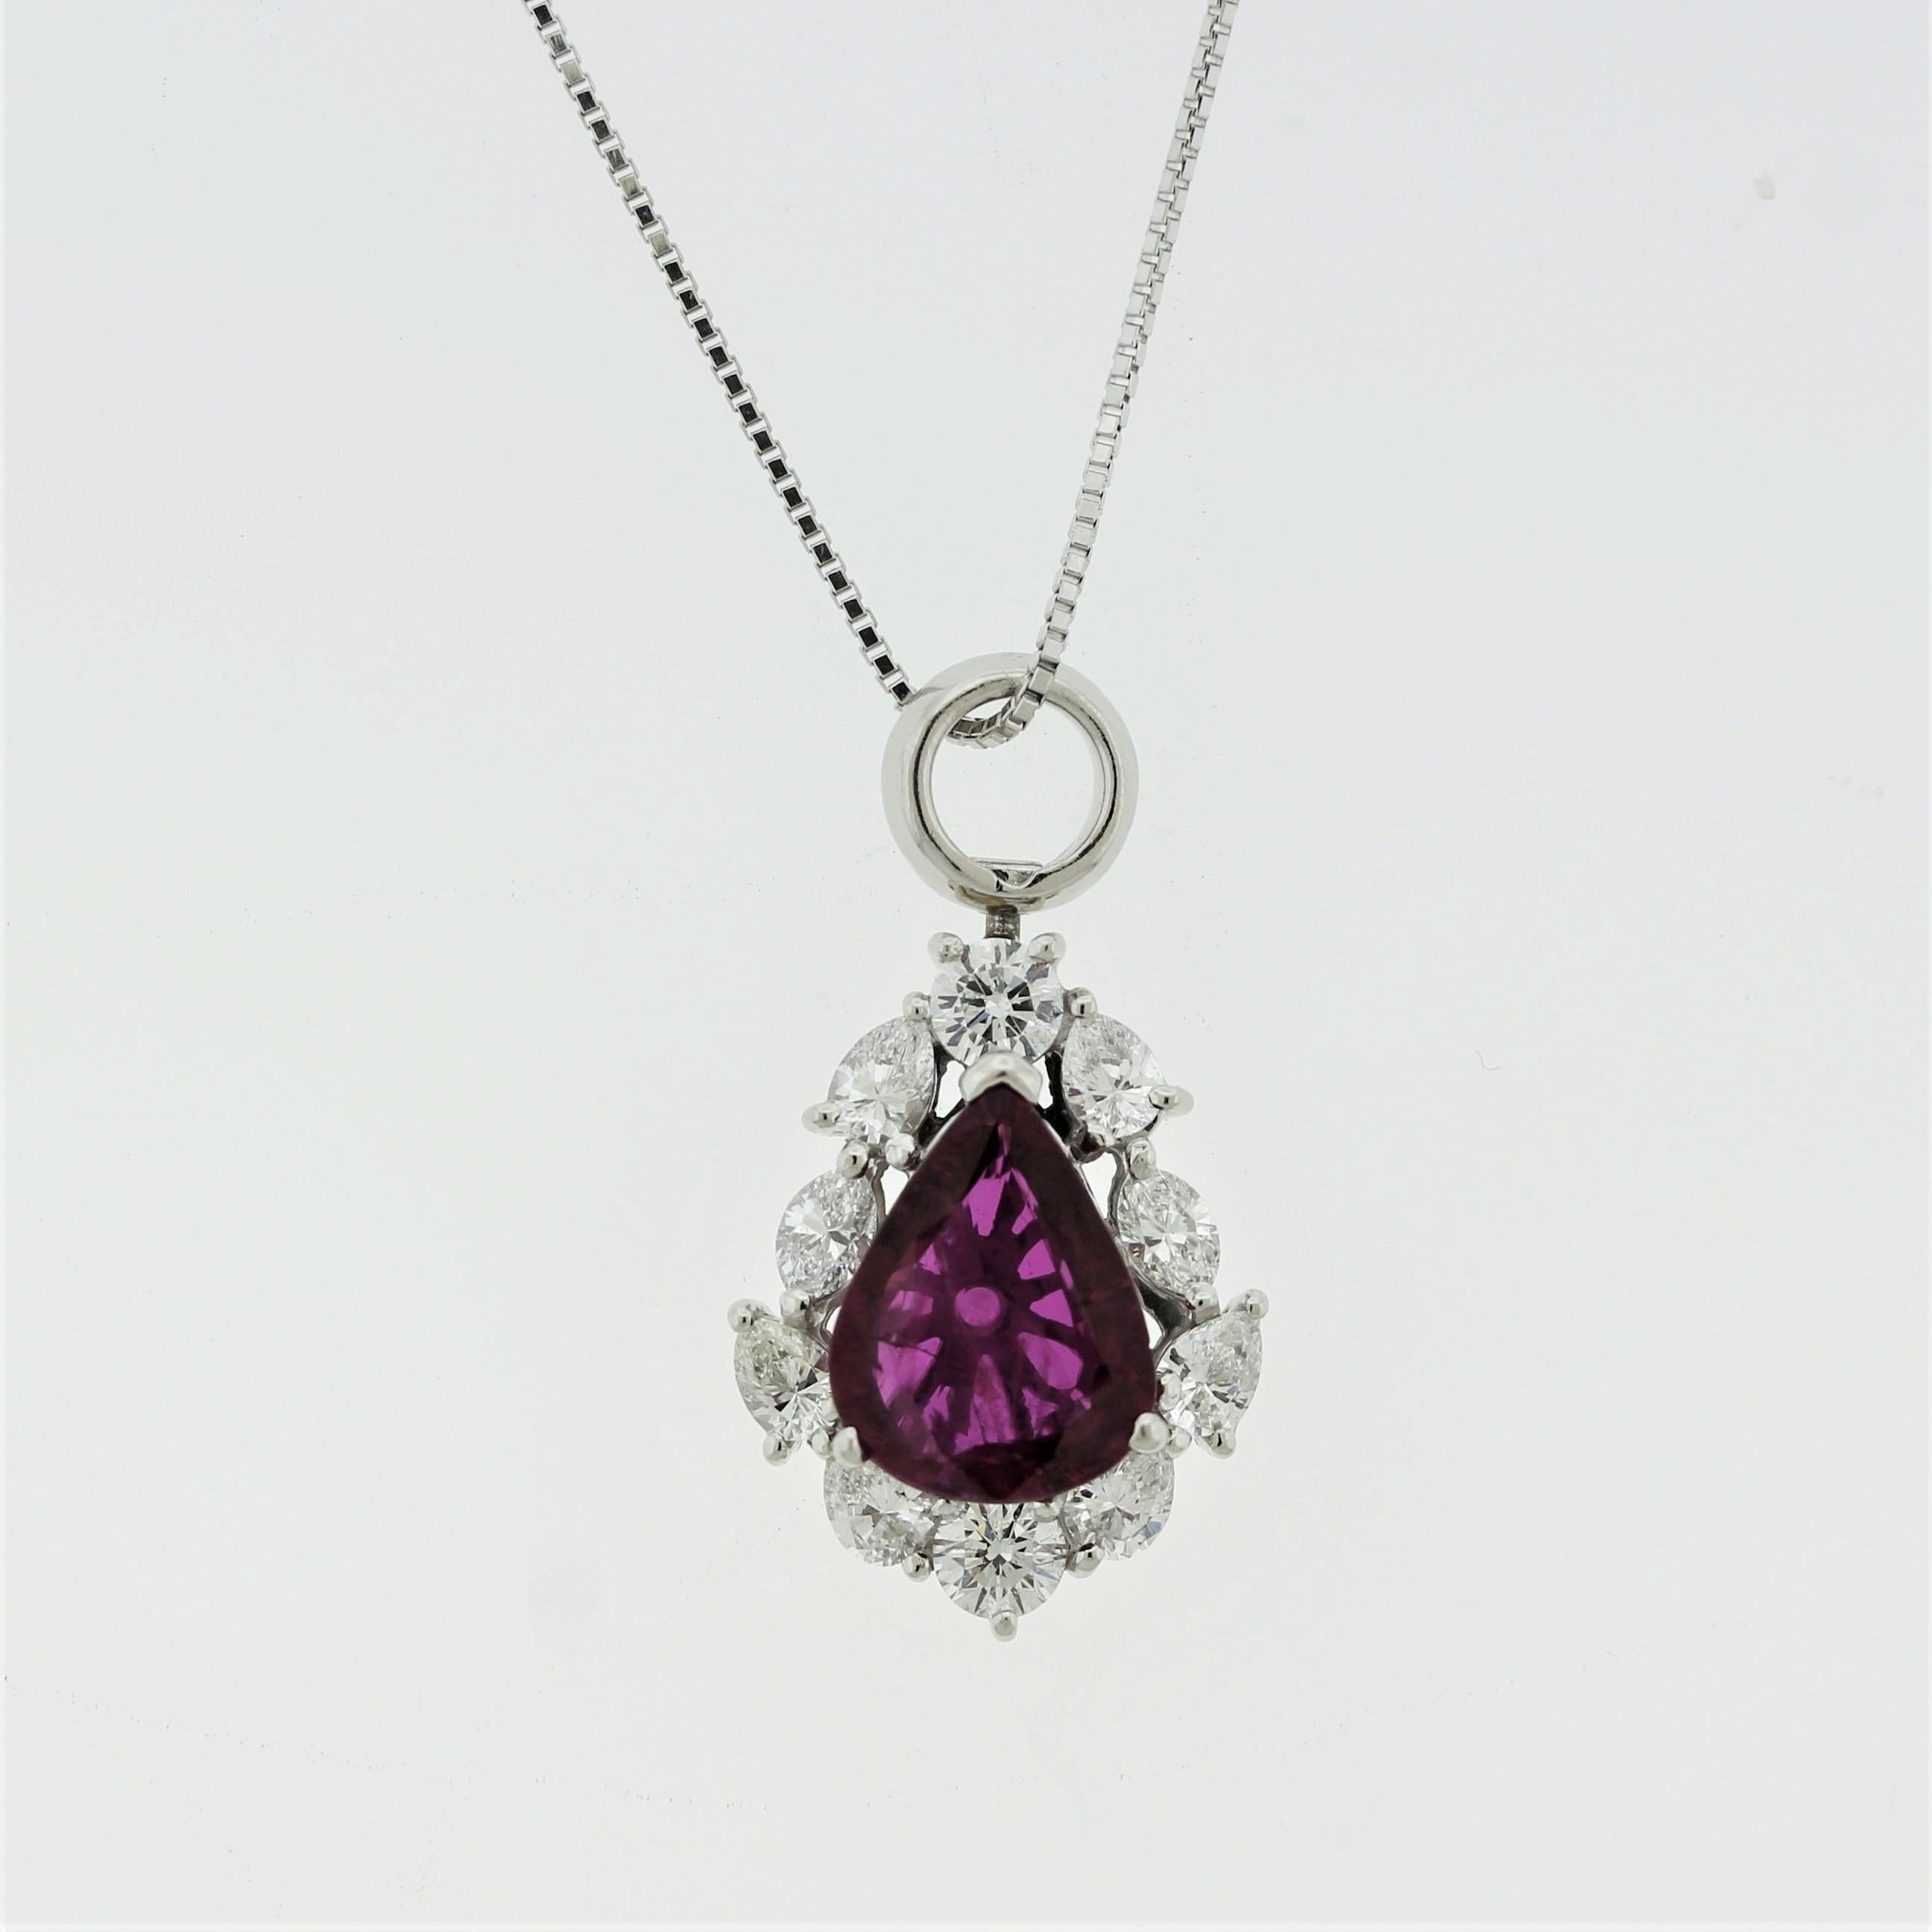 A fine pear-shape ruby takes center stage of this classy platinum pendant. It weighs 2.05 carats and has a rich intense vivid red color with excellent light and brilliance. It is accented by 0.94 carats of large round brilliant, pear, and marquise